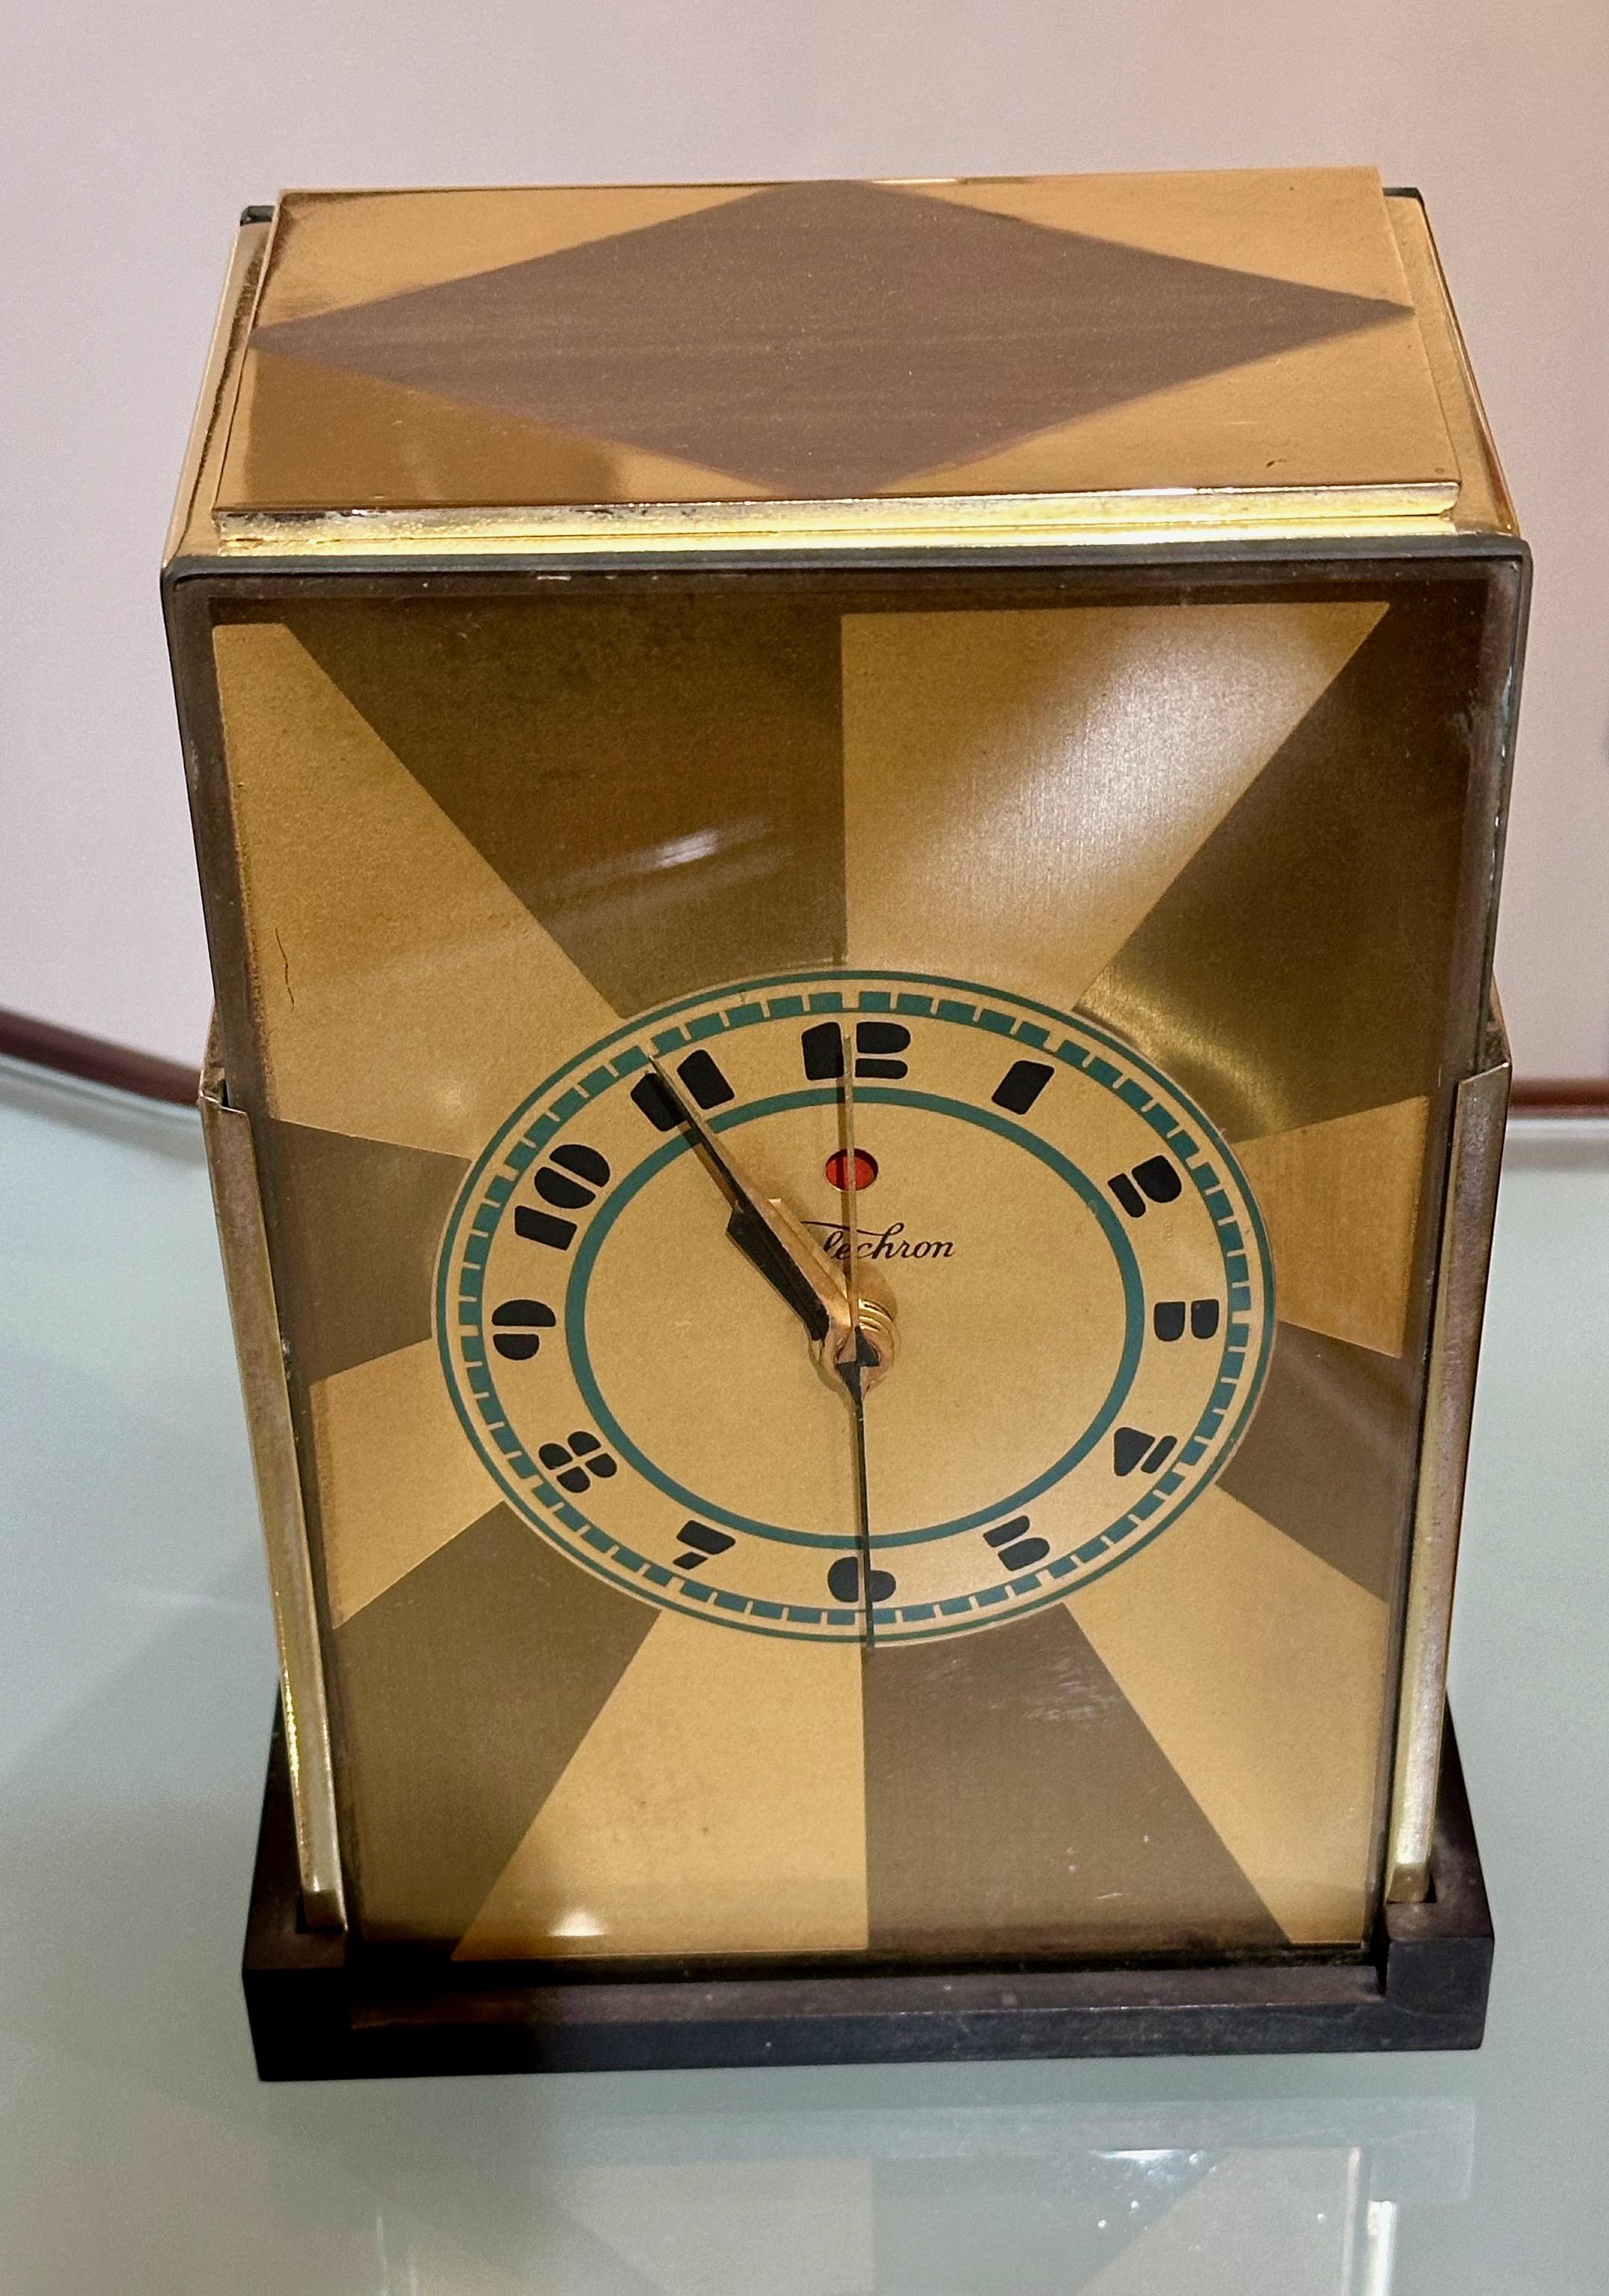 Art Deco Skyscraper Warren Telechron Clock 431Modernique by Paul Frankl, 1928. This very rare two-tone gold model with a bakelite base and rear panel includes a blue chapter ring dial with a black logo and numbers. This radio has just been recently